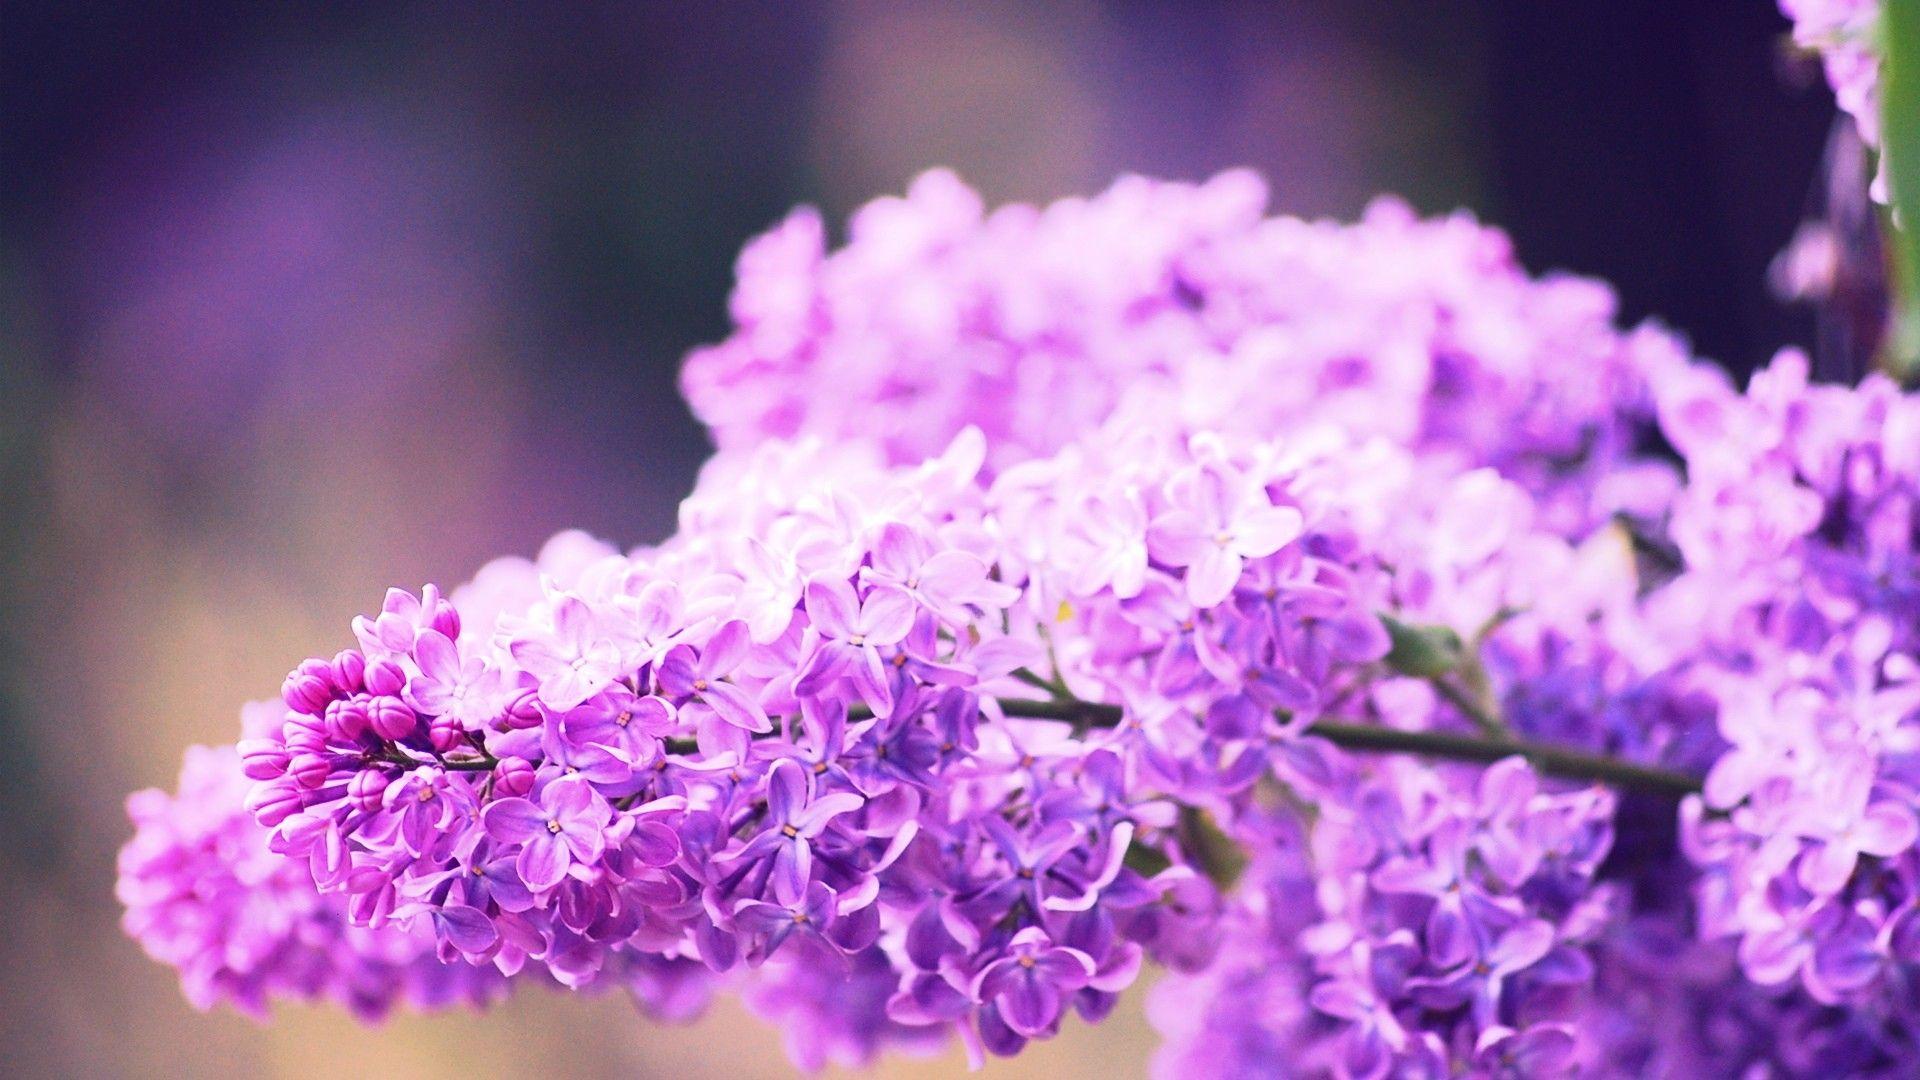 Flowers lilac pink wallpaper. PC